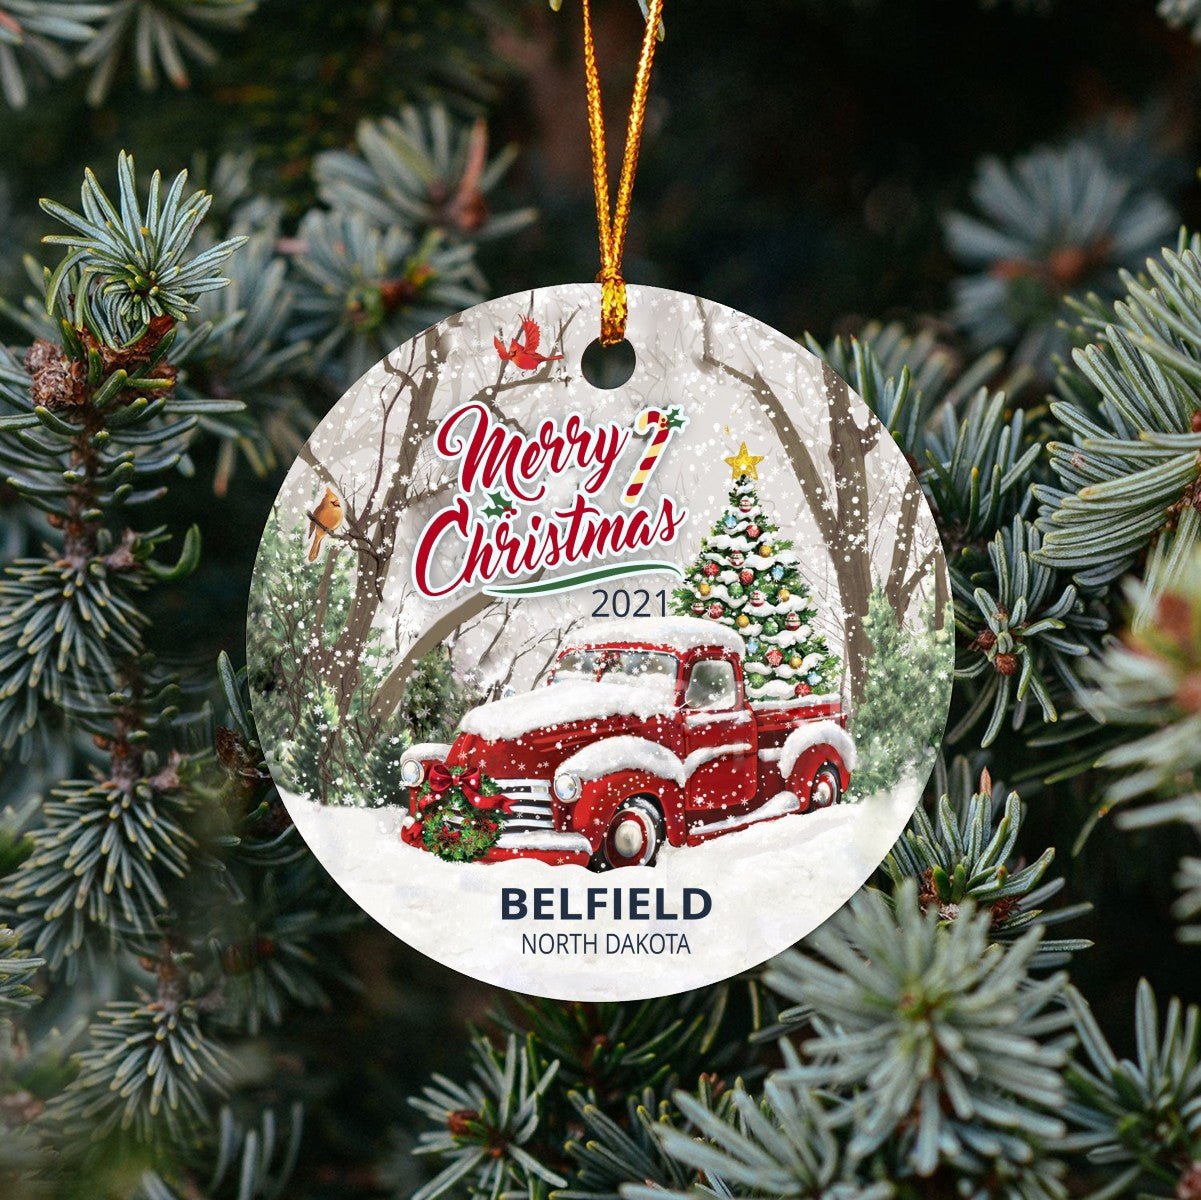 Christmas Tree Ornaments Belfield - Ornament With Name City, State Belfield North Dakota ND Ornament - Red Truck Xmas Ornaments 3'' Plastic Gift For Family, Friend And Housewarming